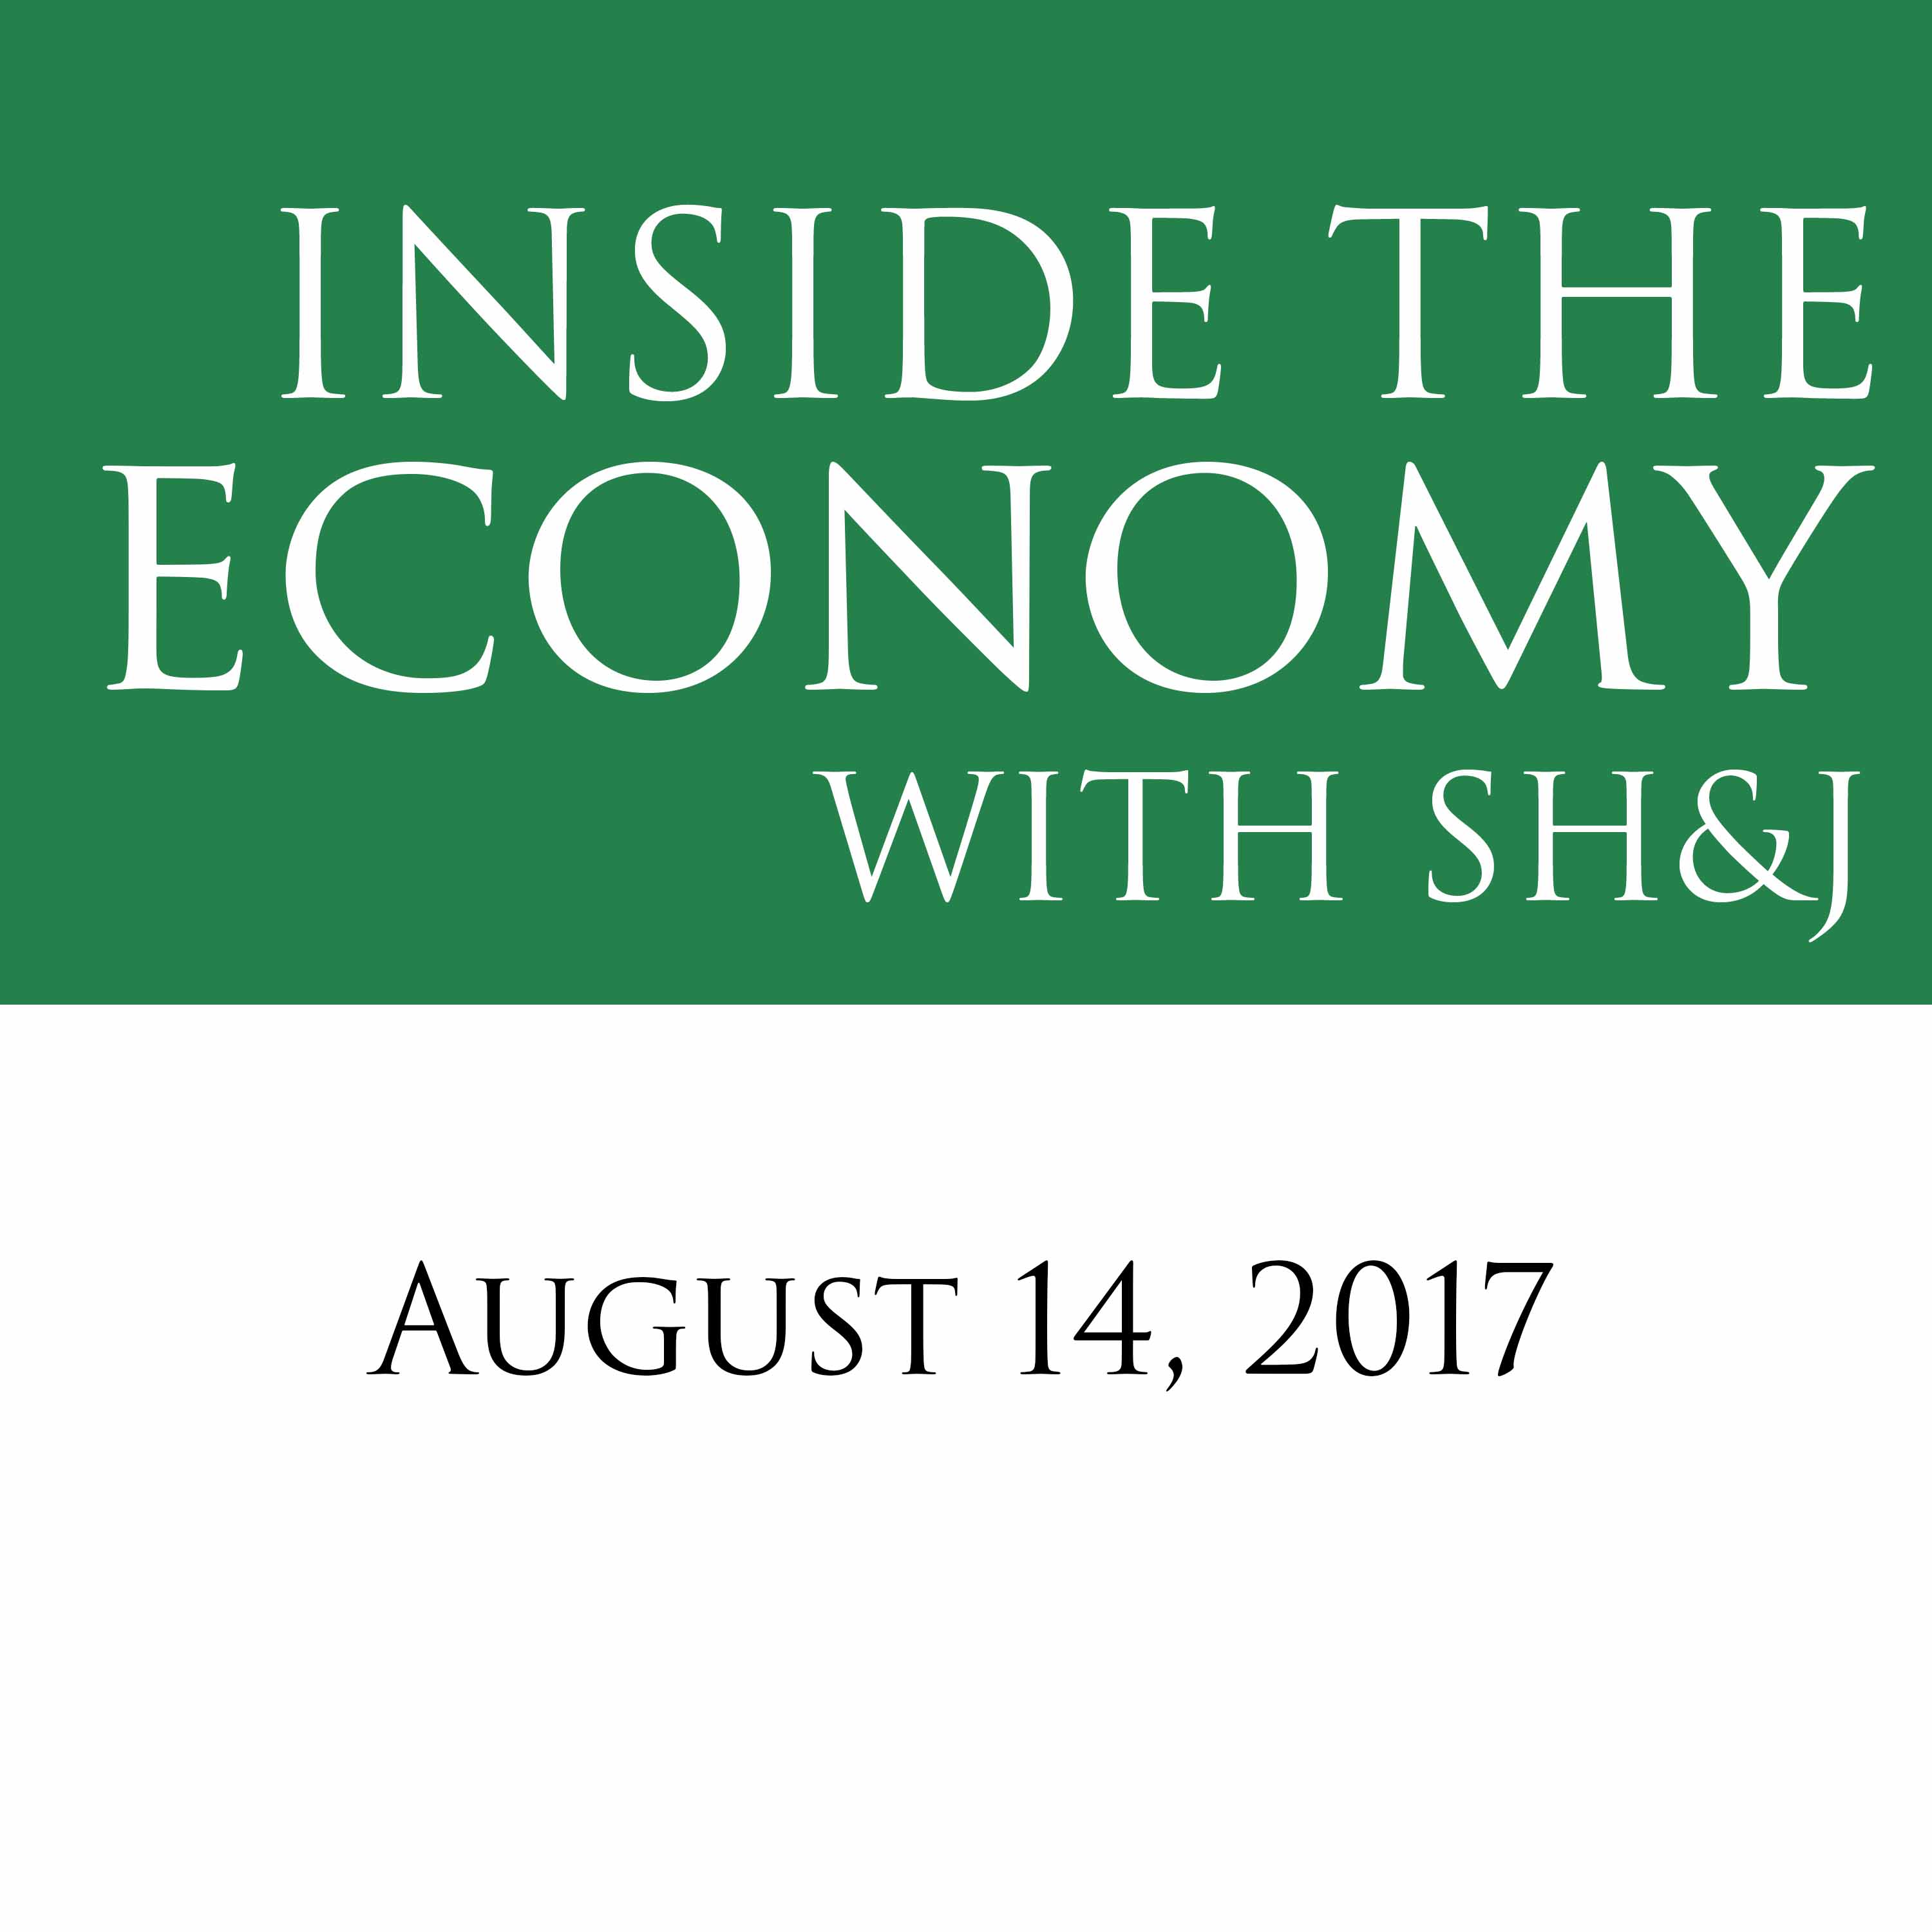 Inside the Economy with SH&J: Disposable Income & Consumption, Colorado Crude Oil, and Federal Revenues